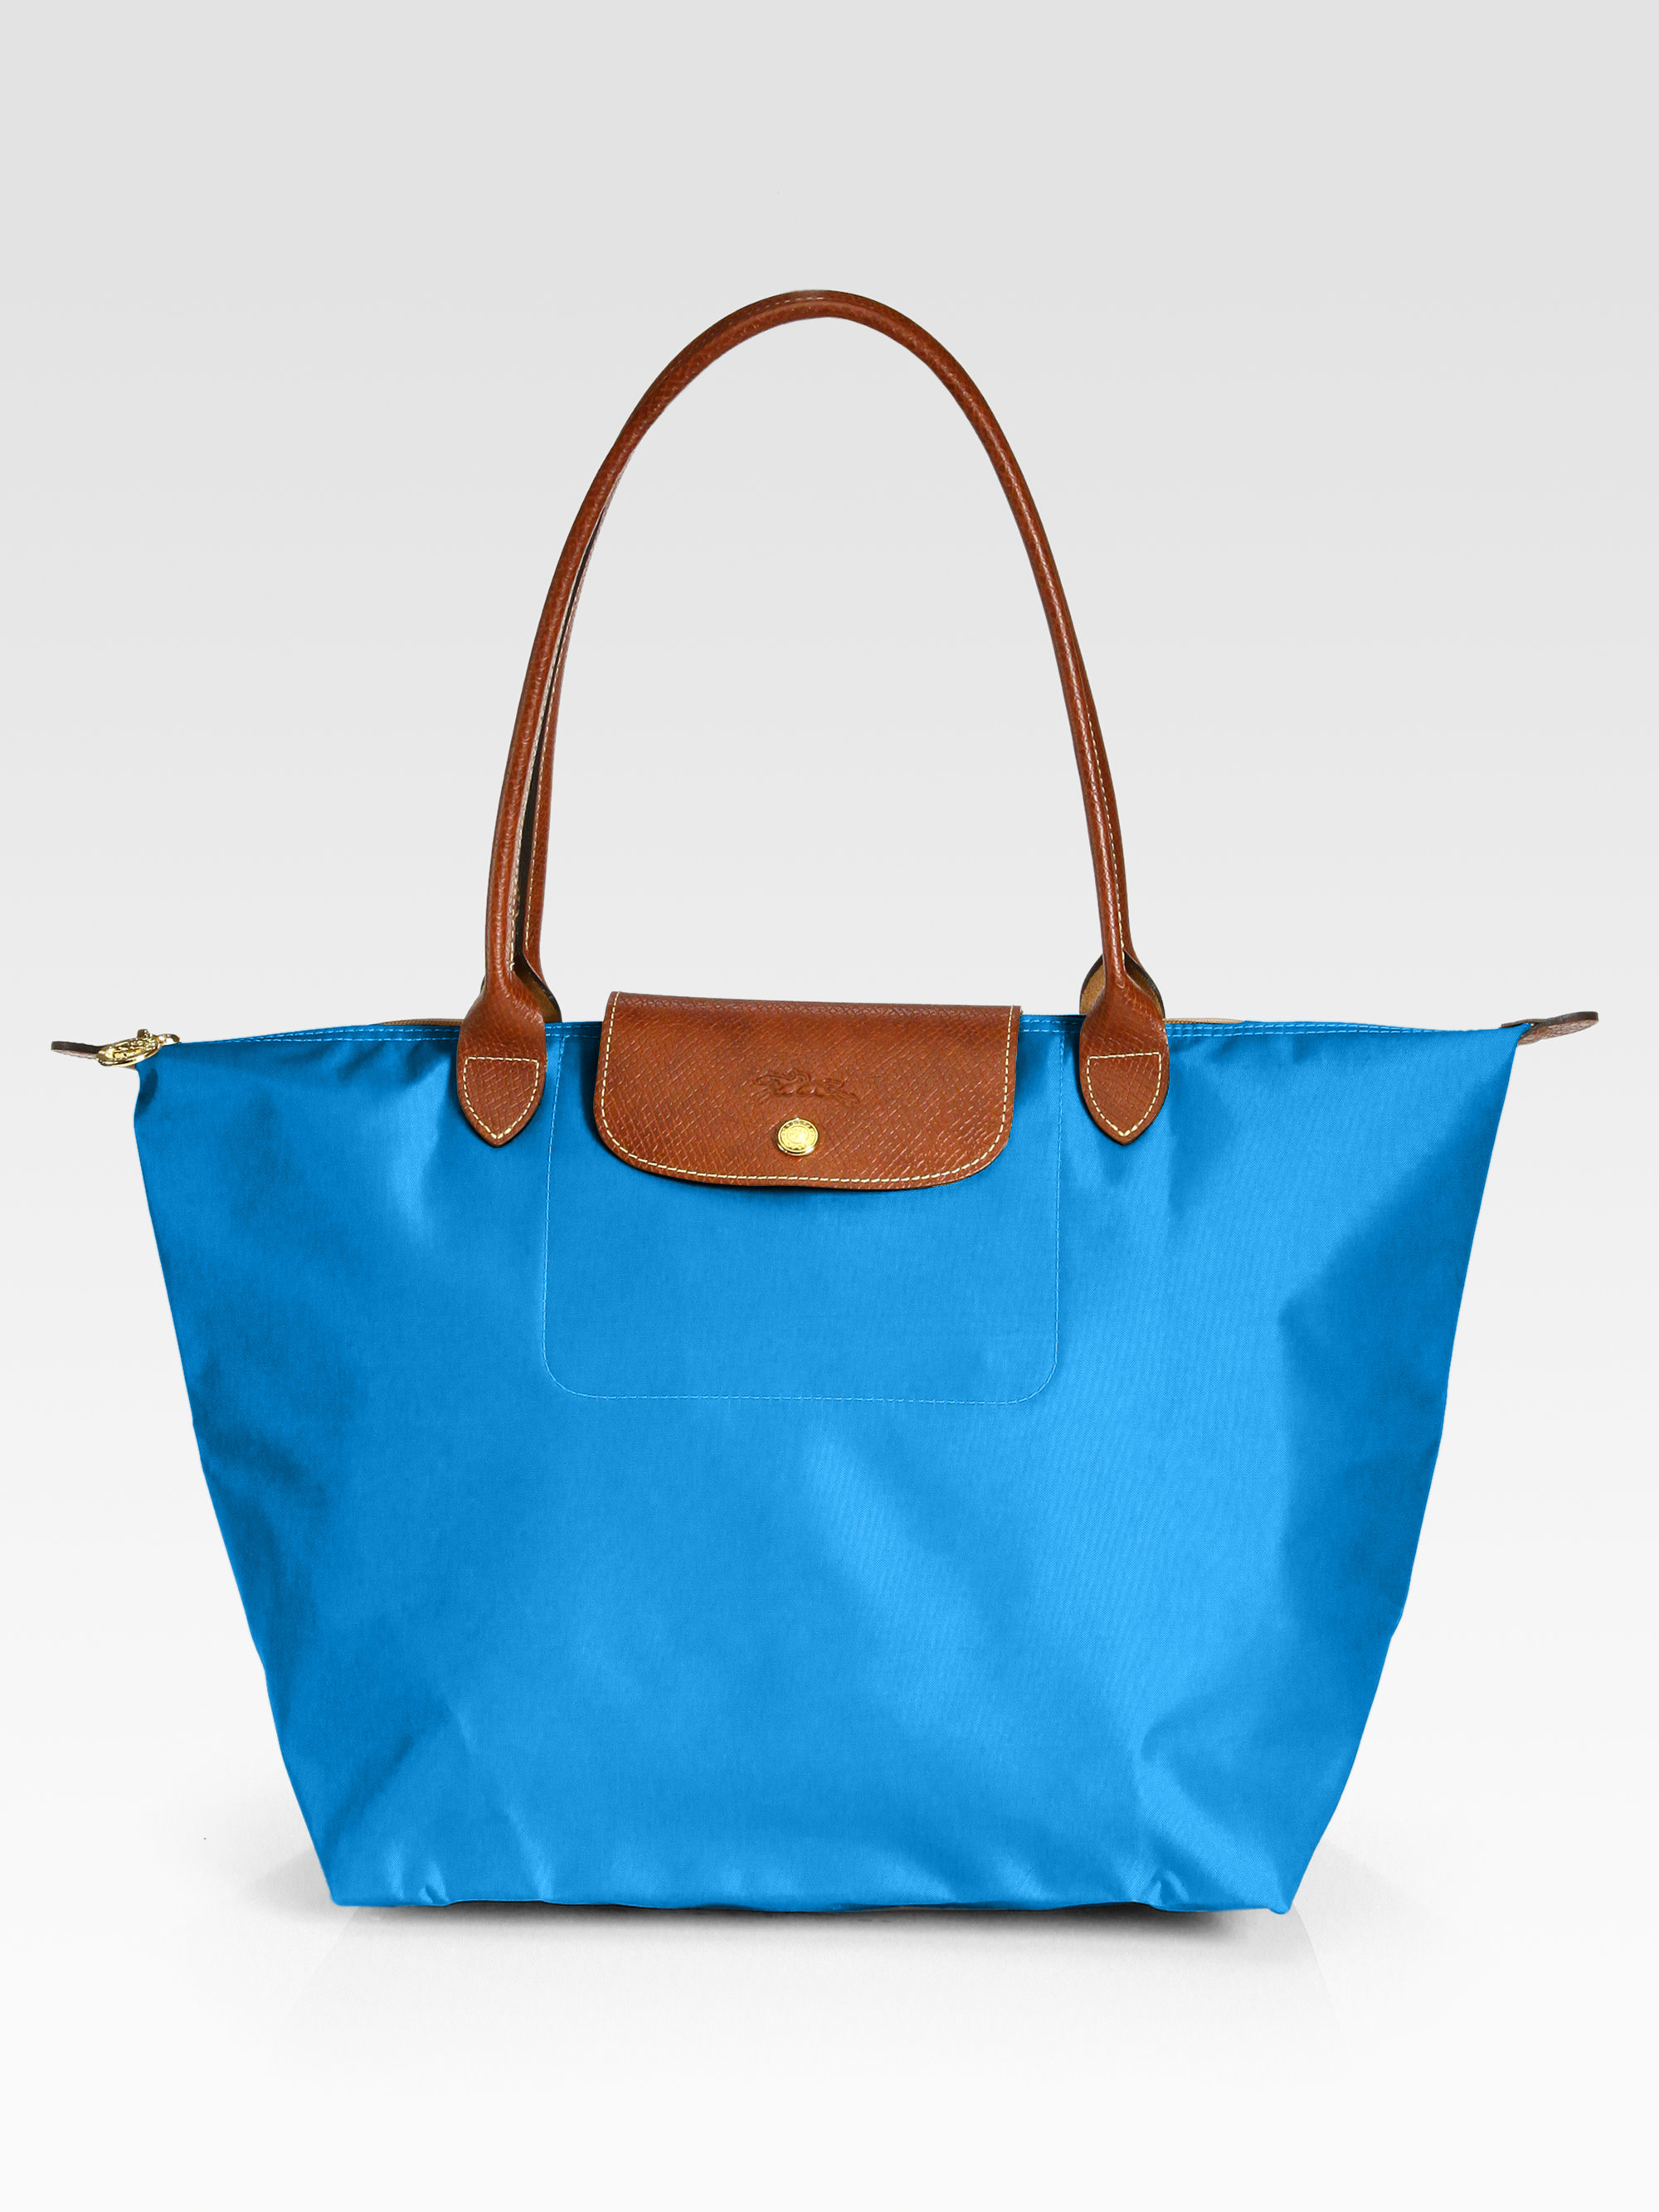 Longchamp Le Pliage Large Shoulder Tote in Brown (ULTRAMARINE) | Lyst